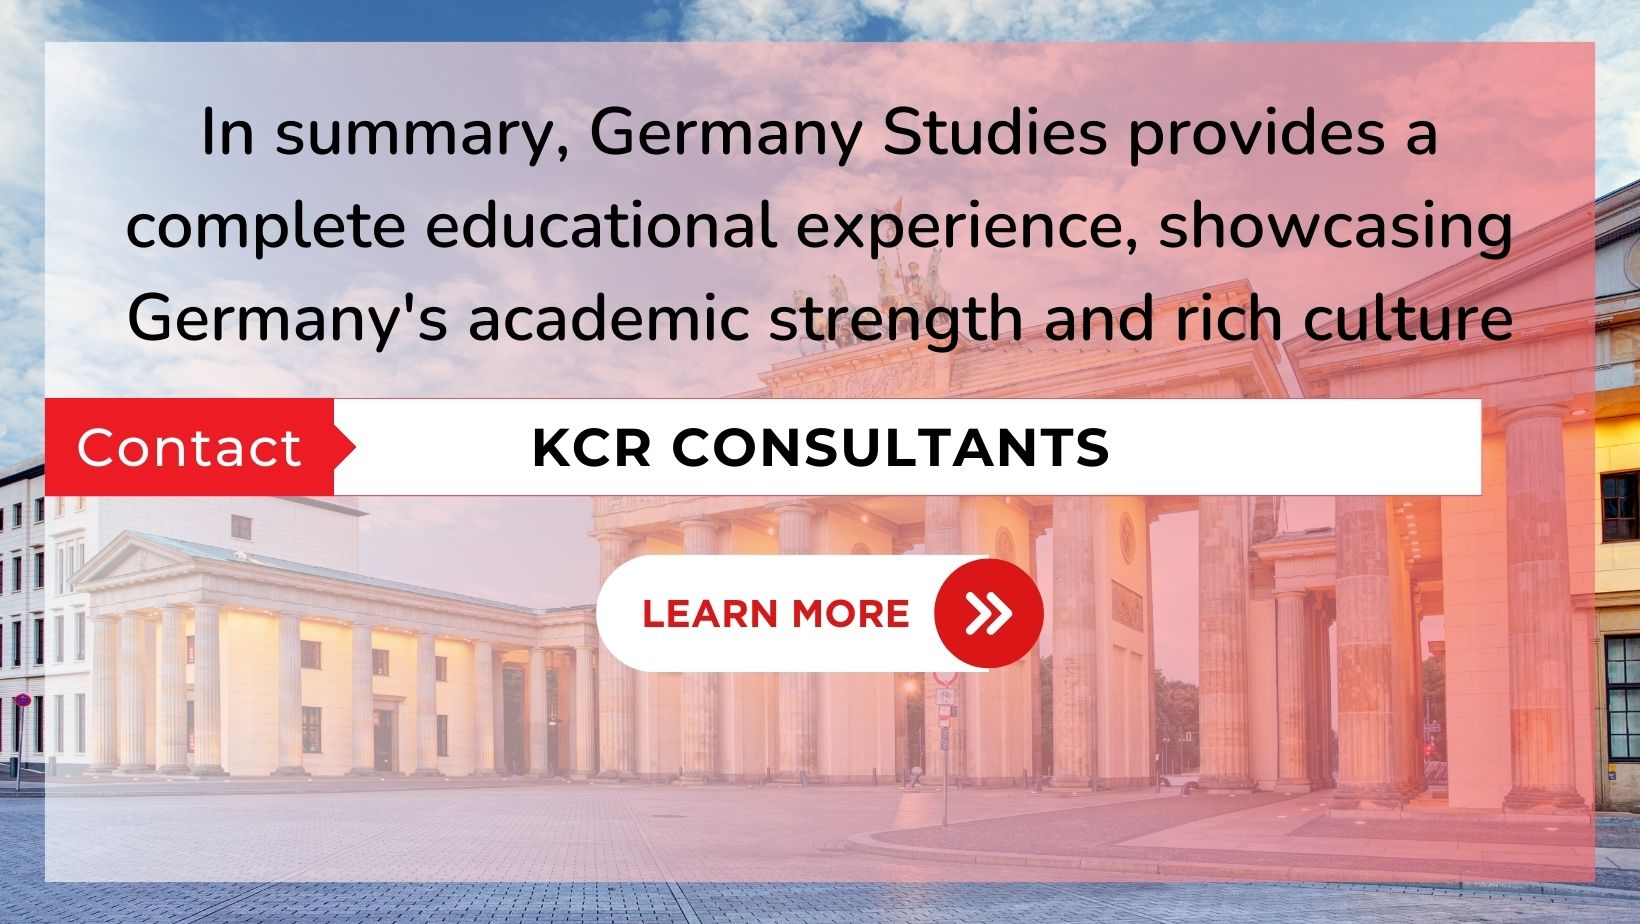 GERMANY STUDIES - KCR CONSULTANTS - Contact us